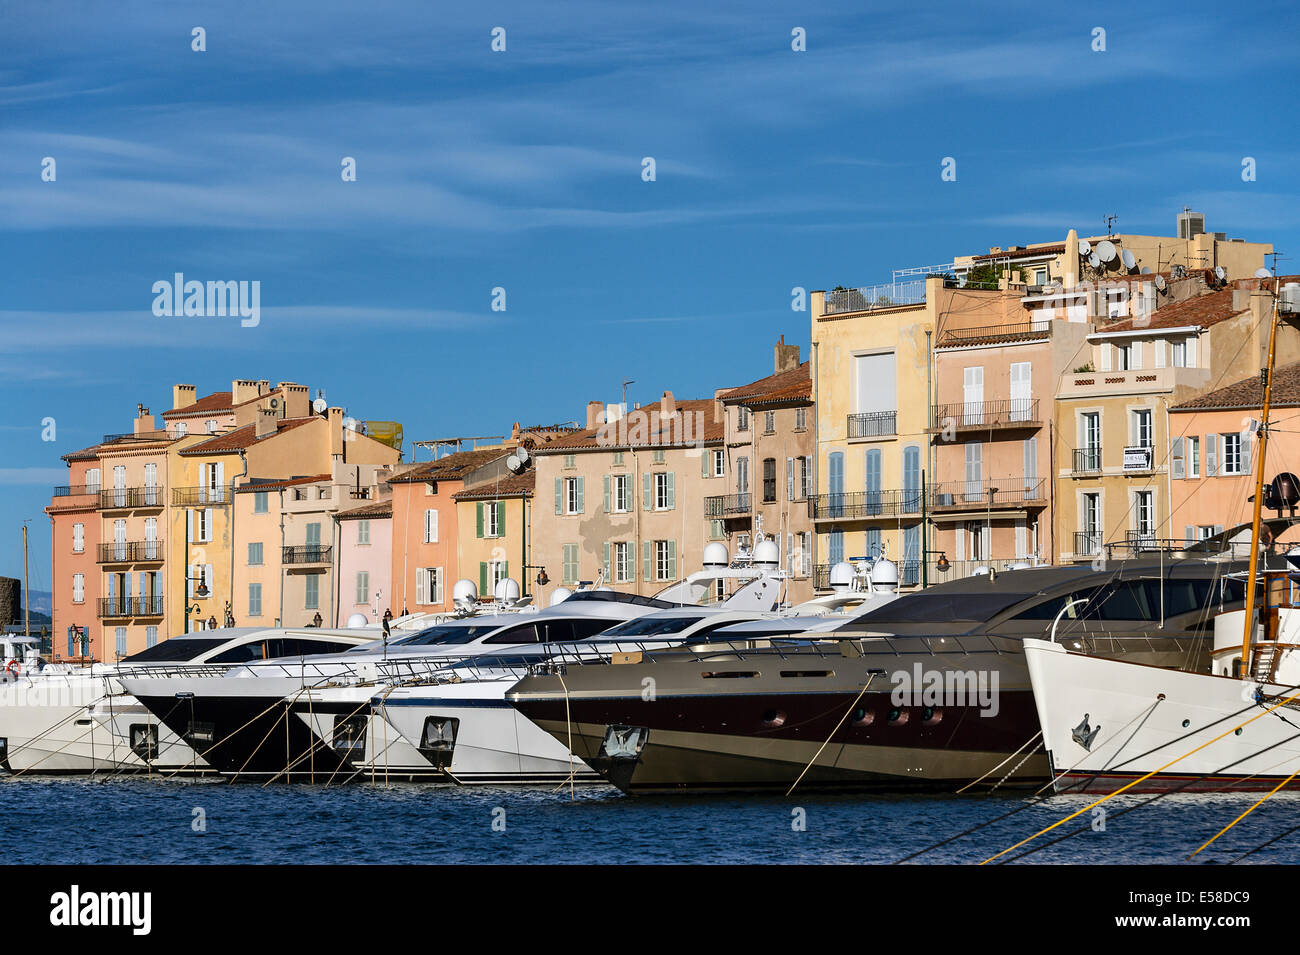 Saint-Tropez waterfront architecture and yachts, Provence, France Stock Photo